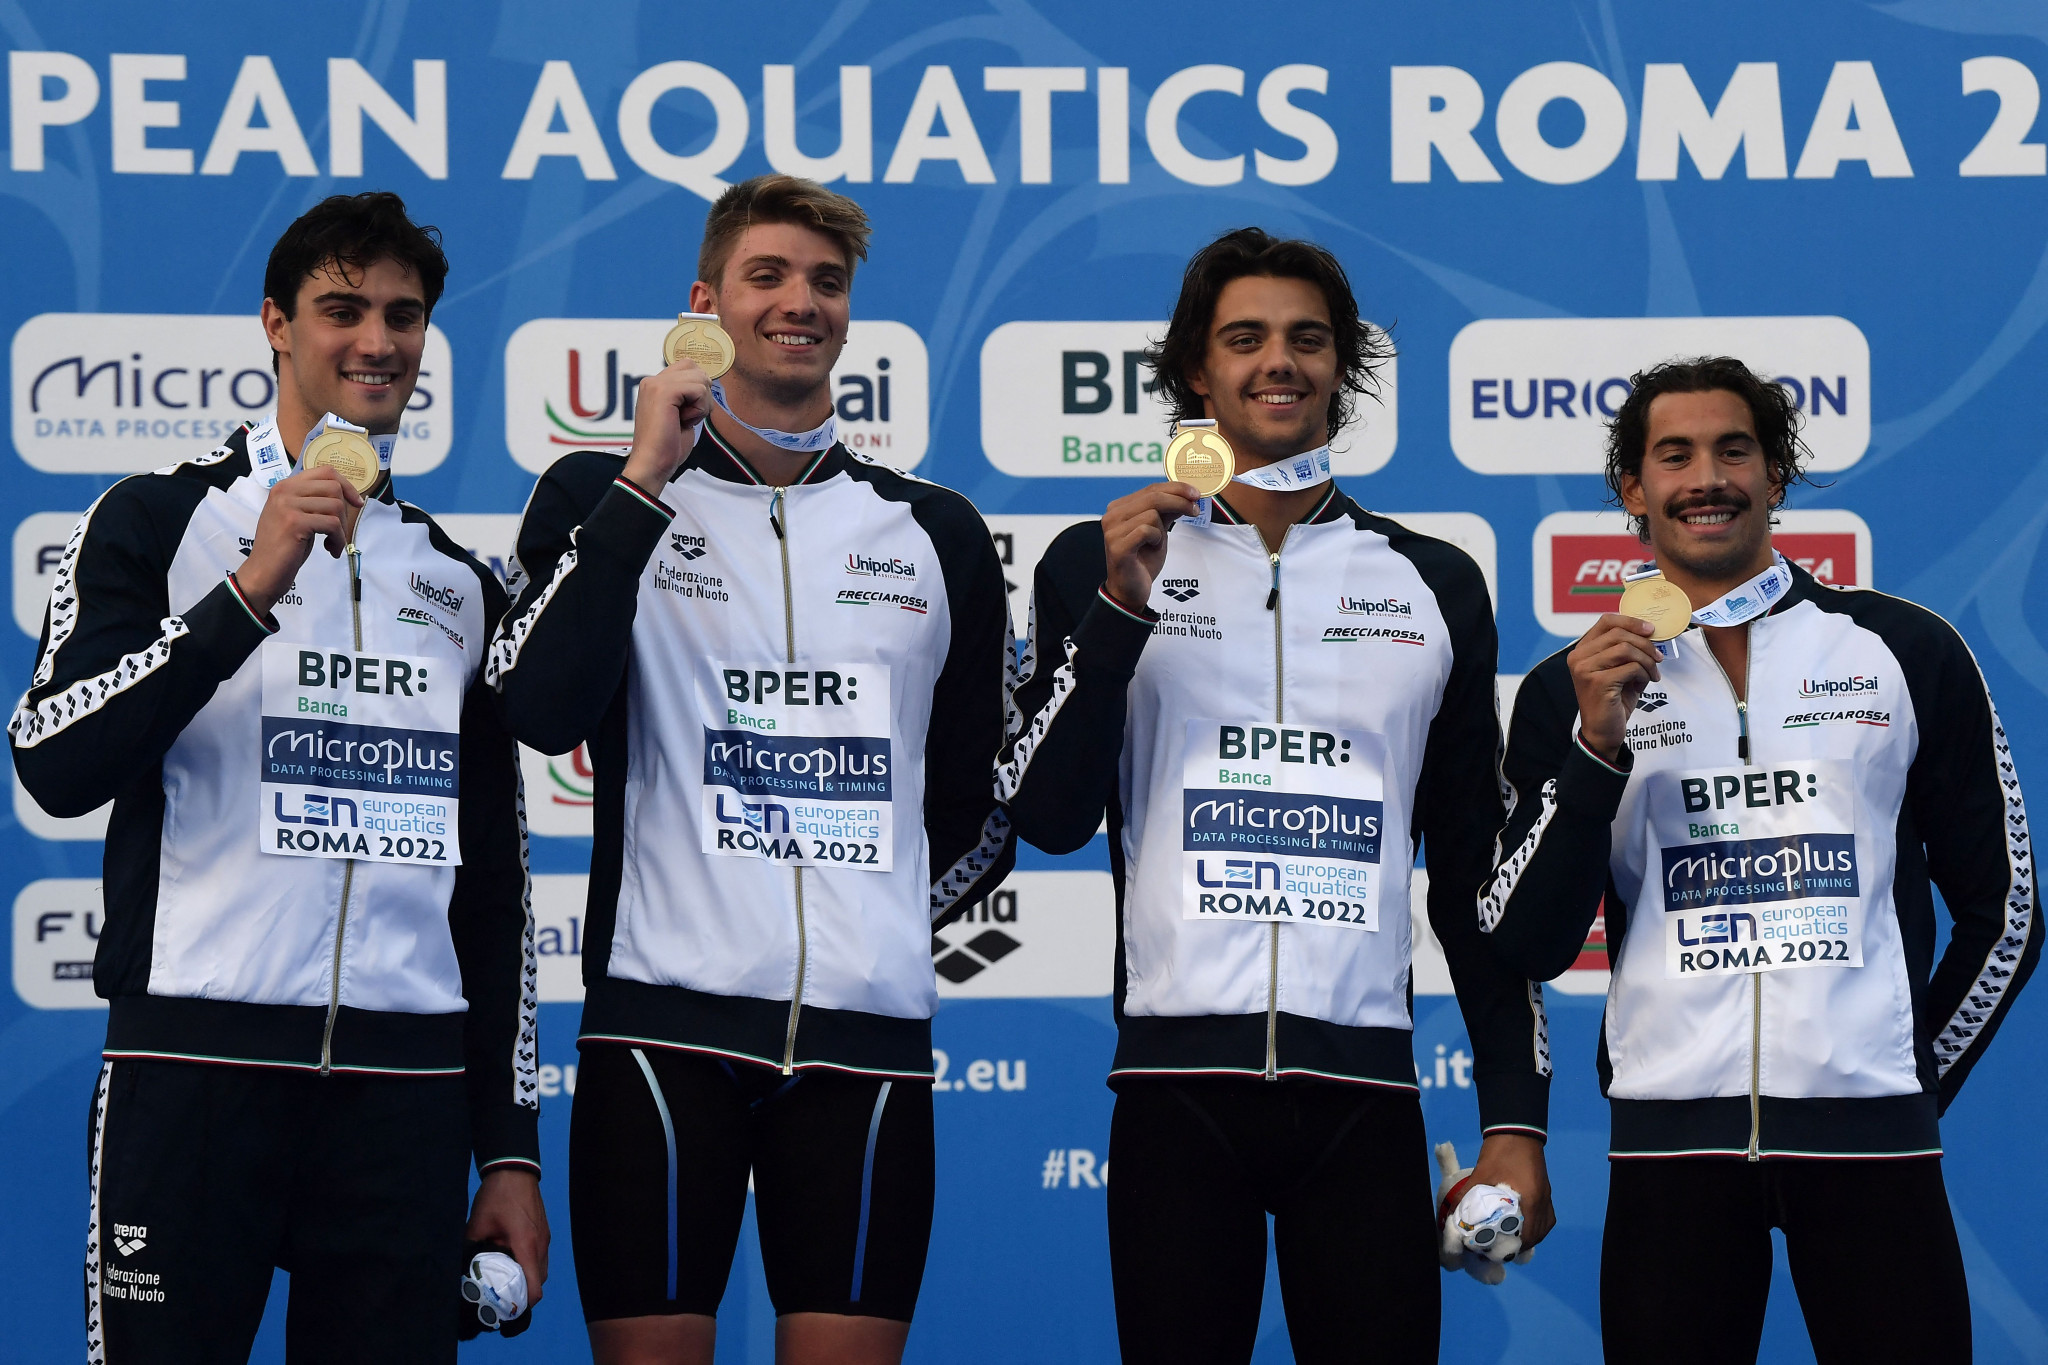 Italy's men's 4x100m relay team won gold today at the European Aquatics Championships ©Getty Images